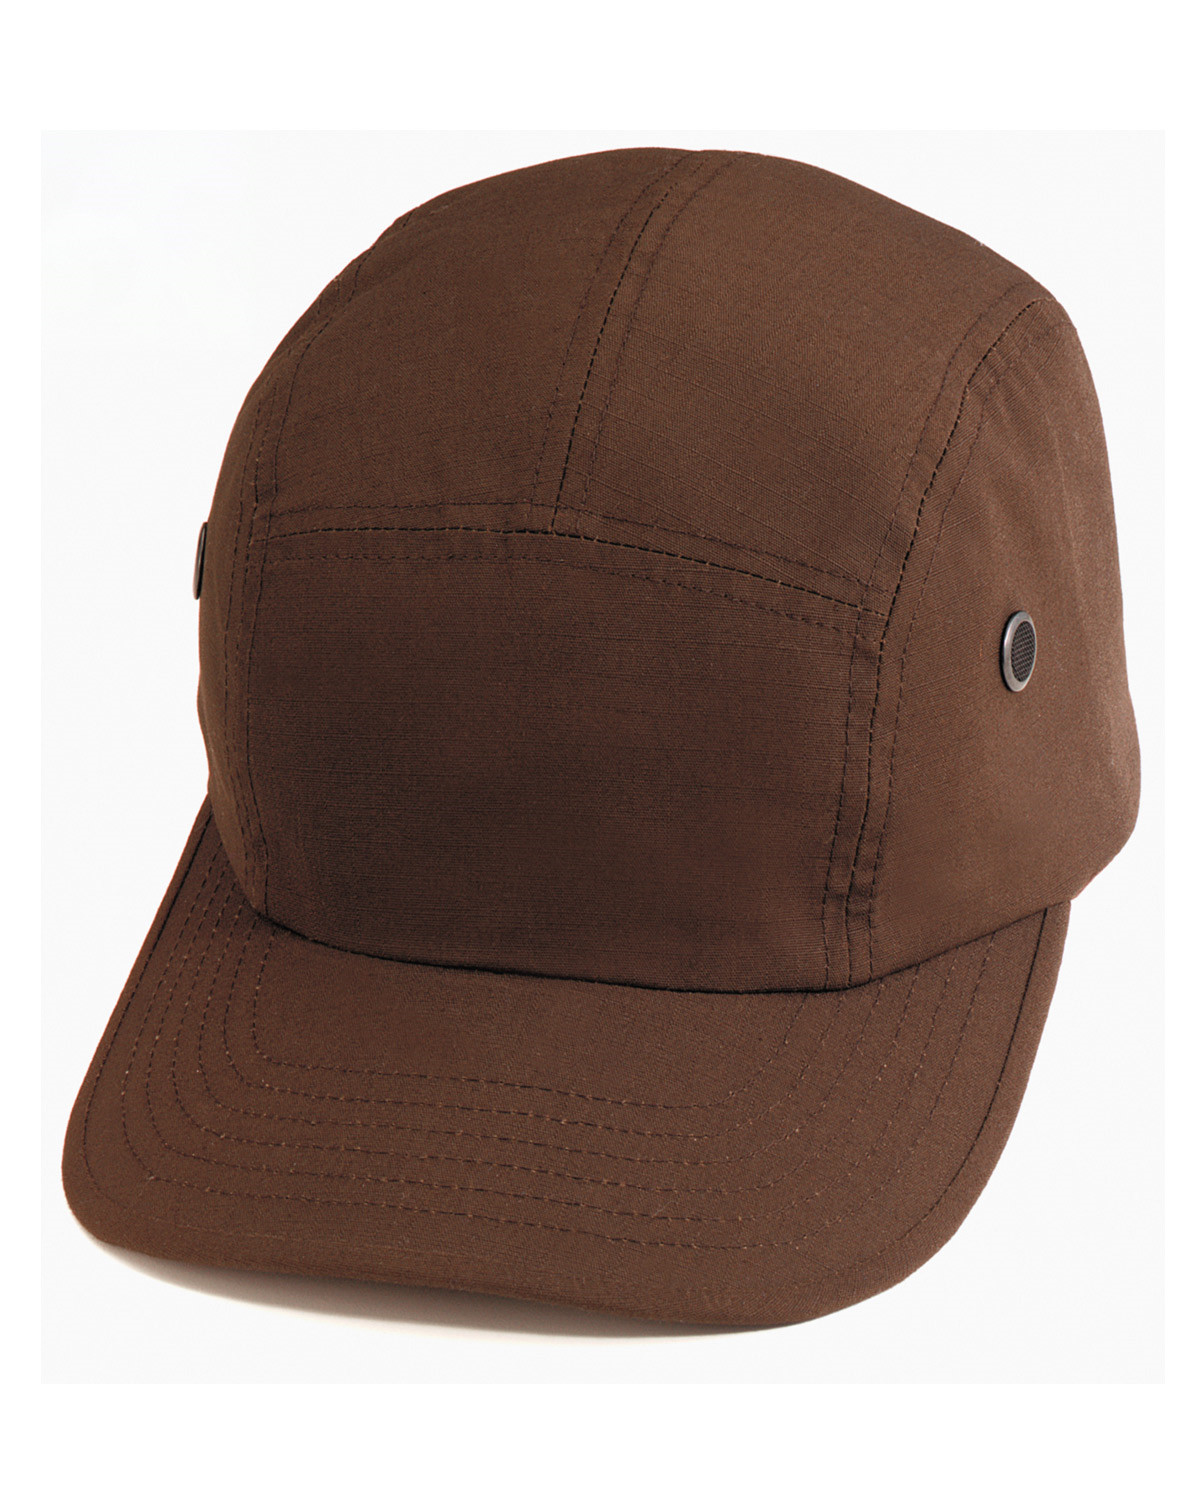 Rothco 5 Panel Cap, Rip-Stop (Brun, One Size)